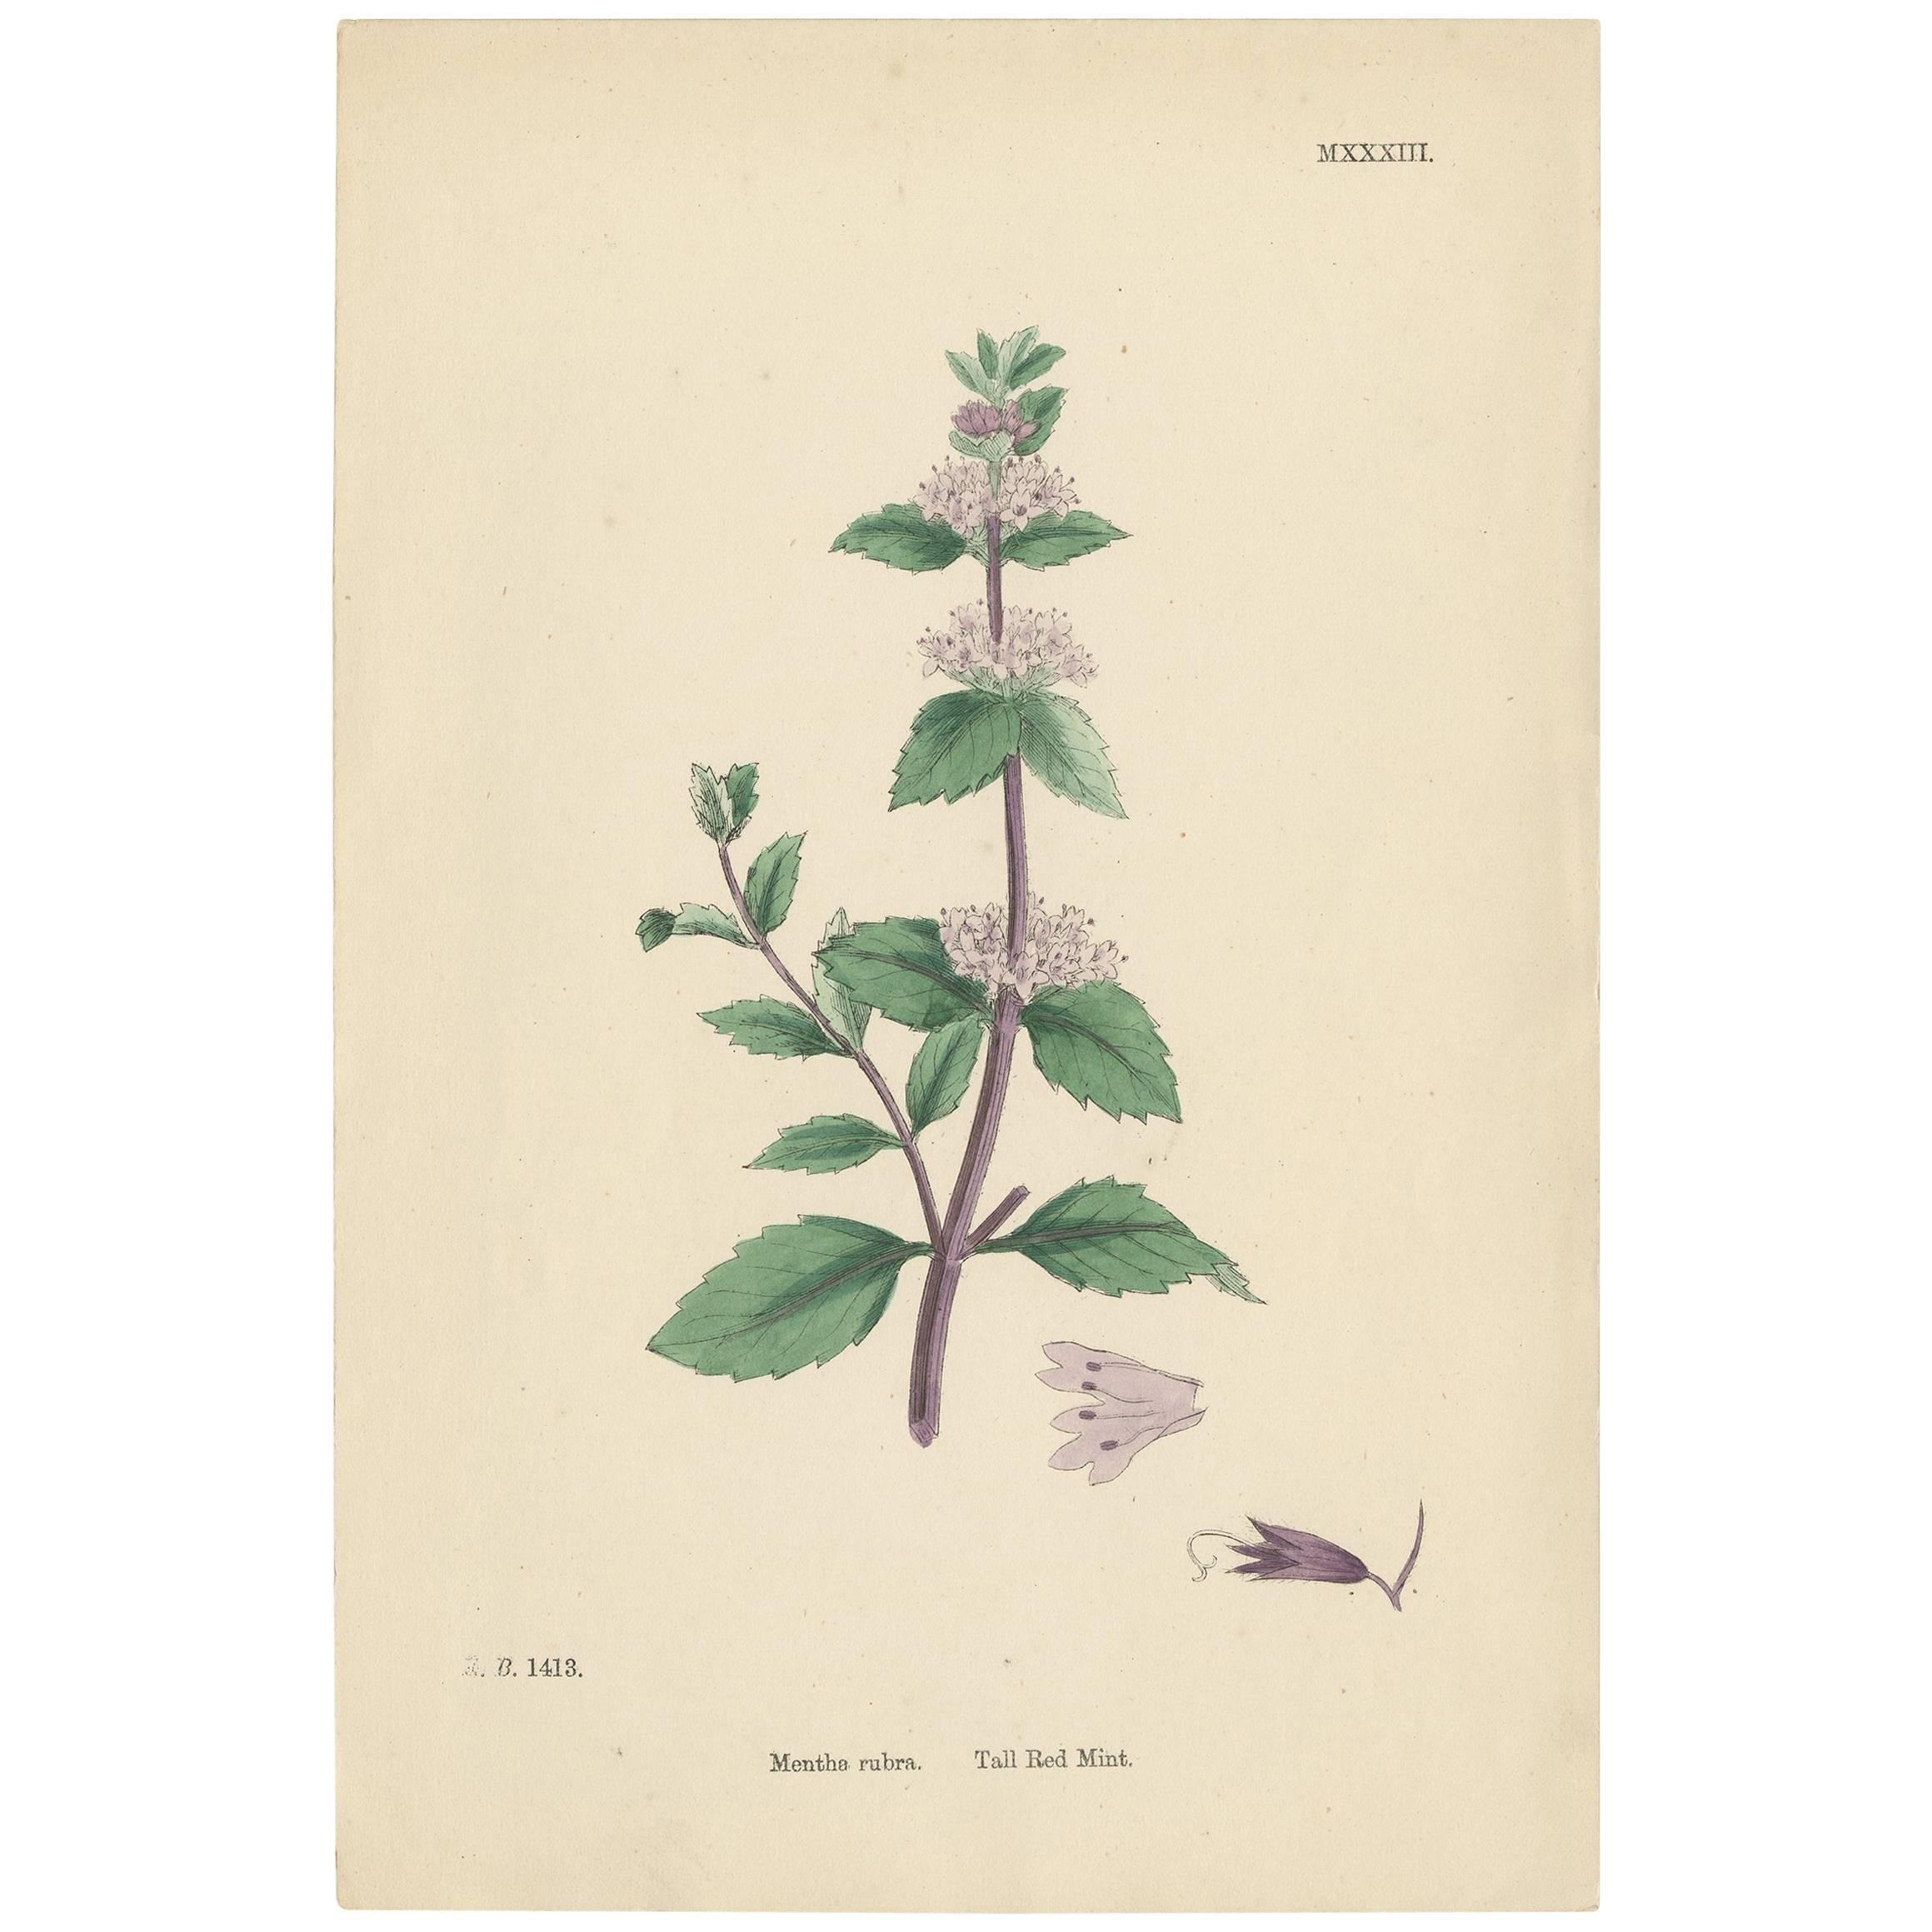 Antique Botany Print 'Tall Red Mint' by J. Sowerby, circa 1860